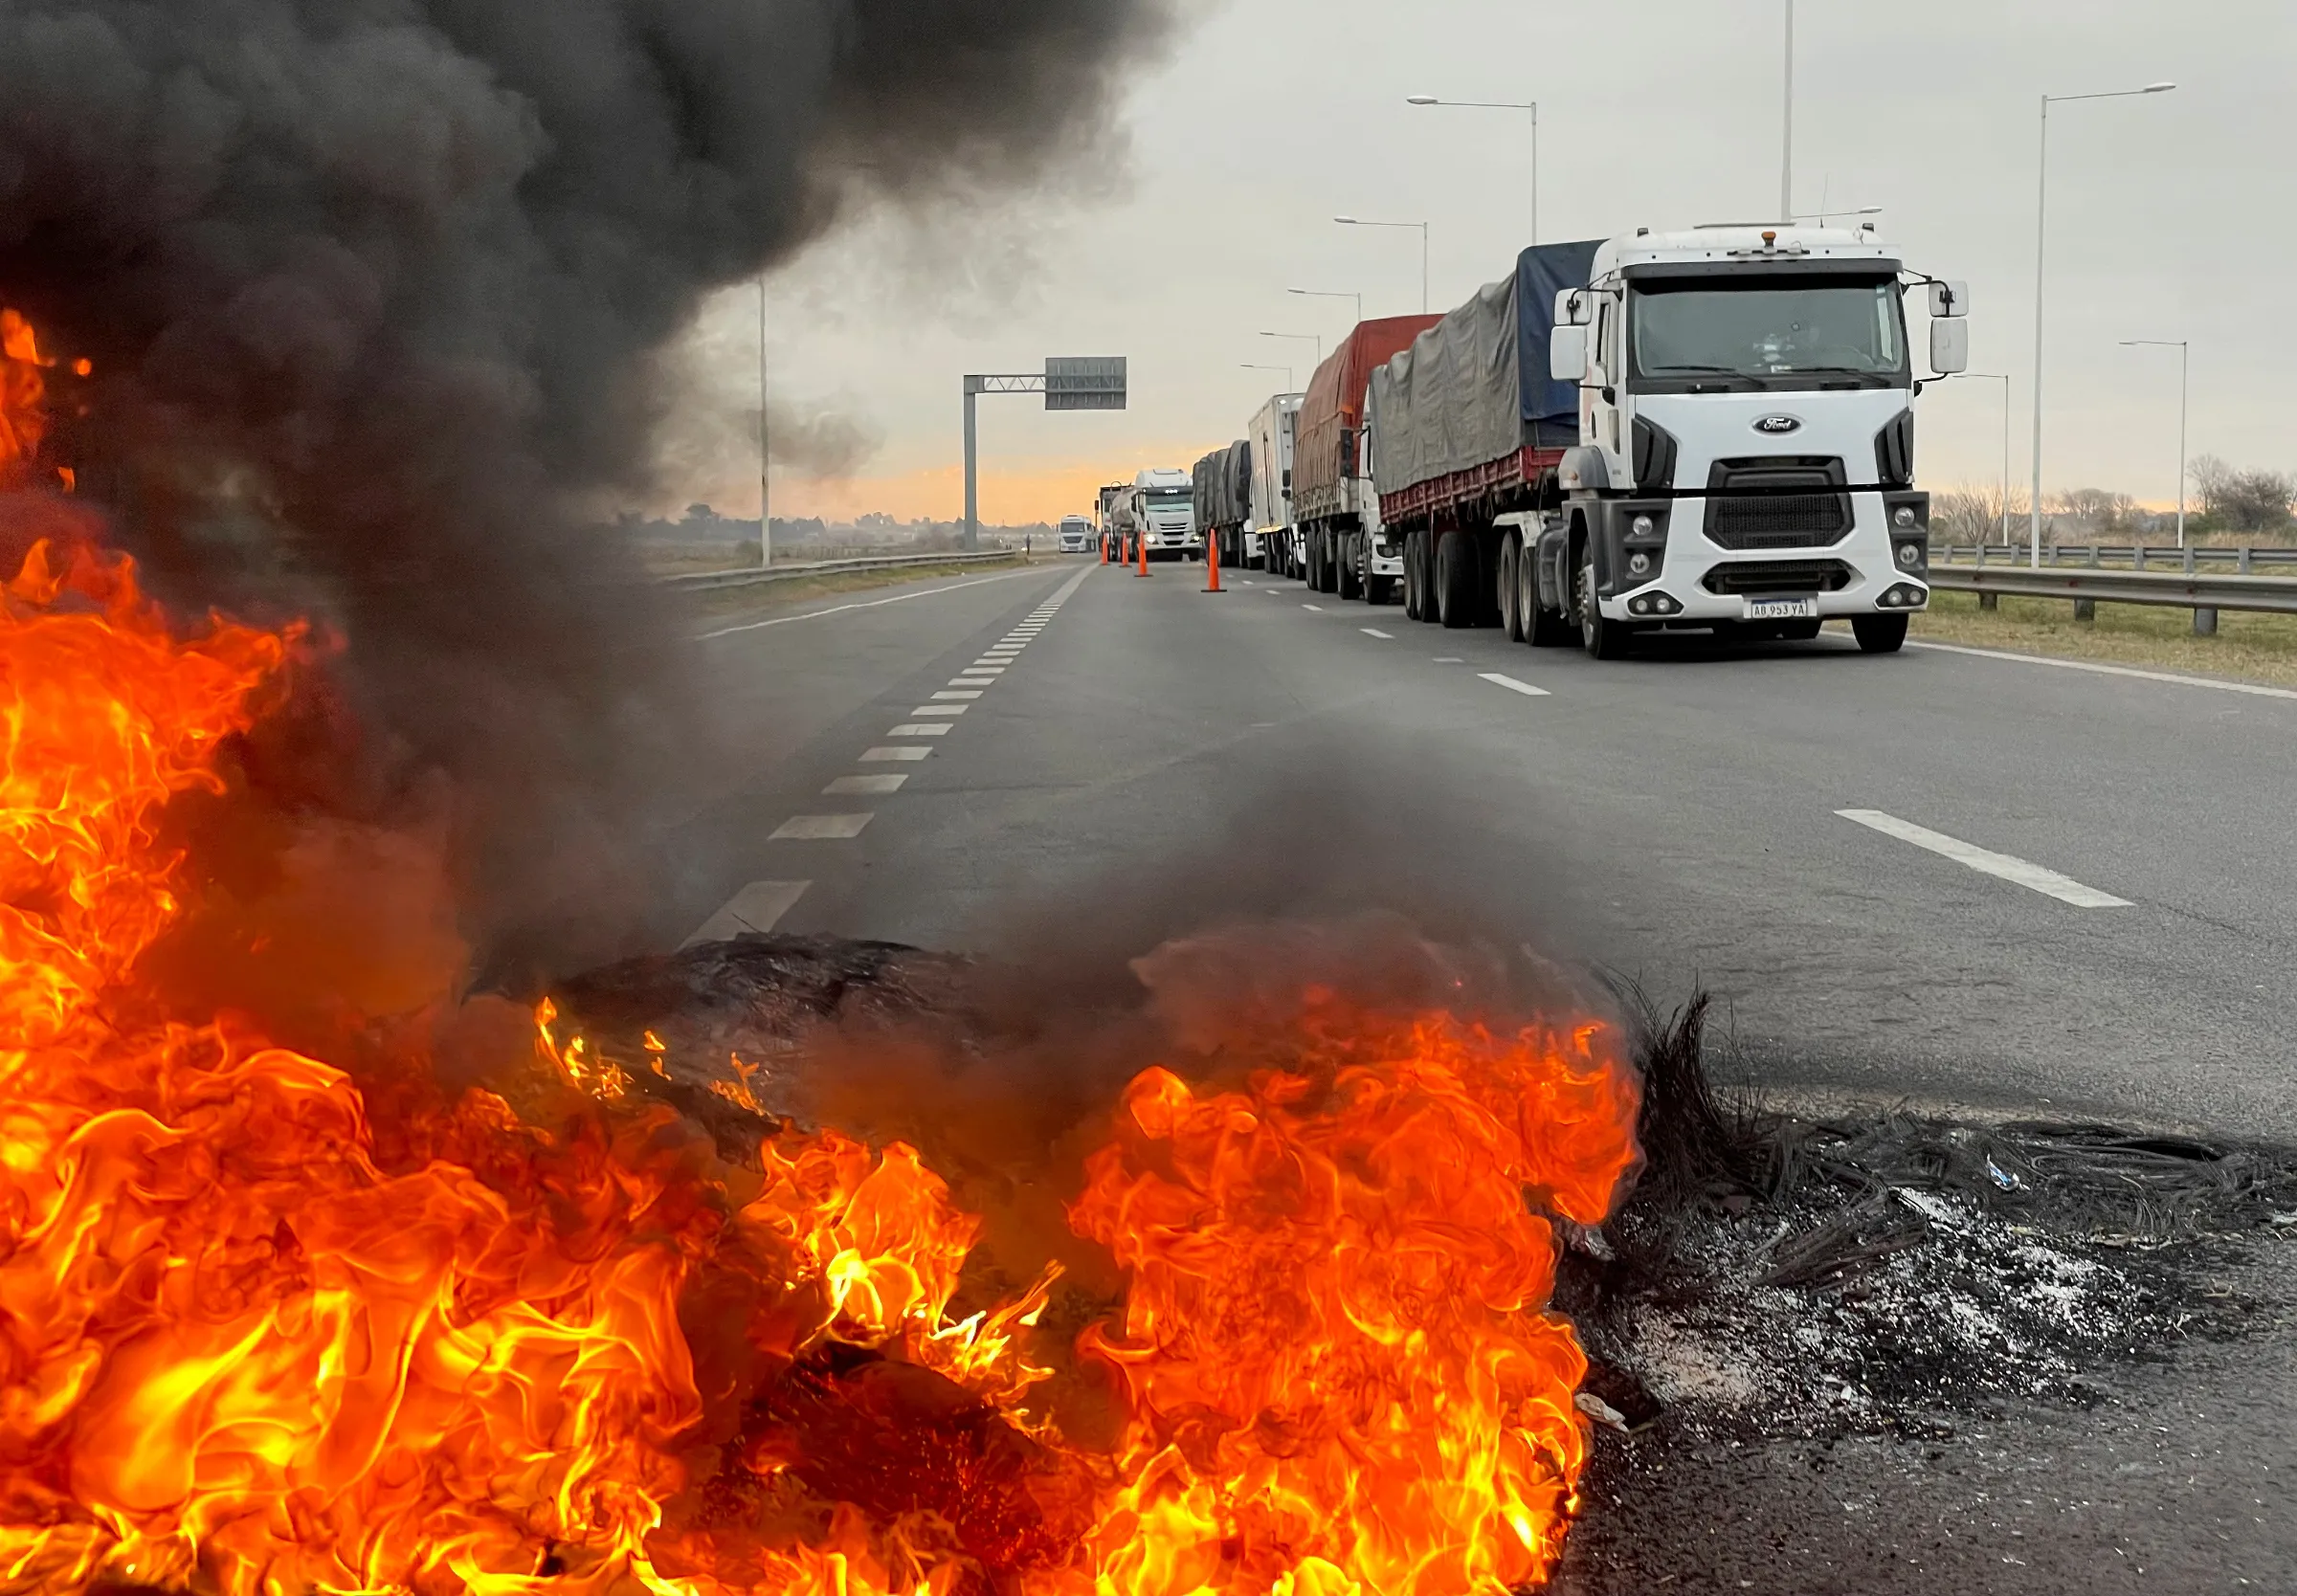 Trucks blocking a highway are pictured near a burning barricade as Argentine truck drivers protest against shortages and rising prices for diesel fuel, just as the country's crucial grains harvest requires transport amid surging inflation, in San Nicolas, Argentina June 23, 2022. REUTERS/Miguel Lo Bianco